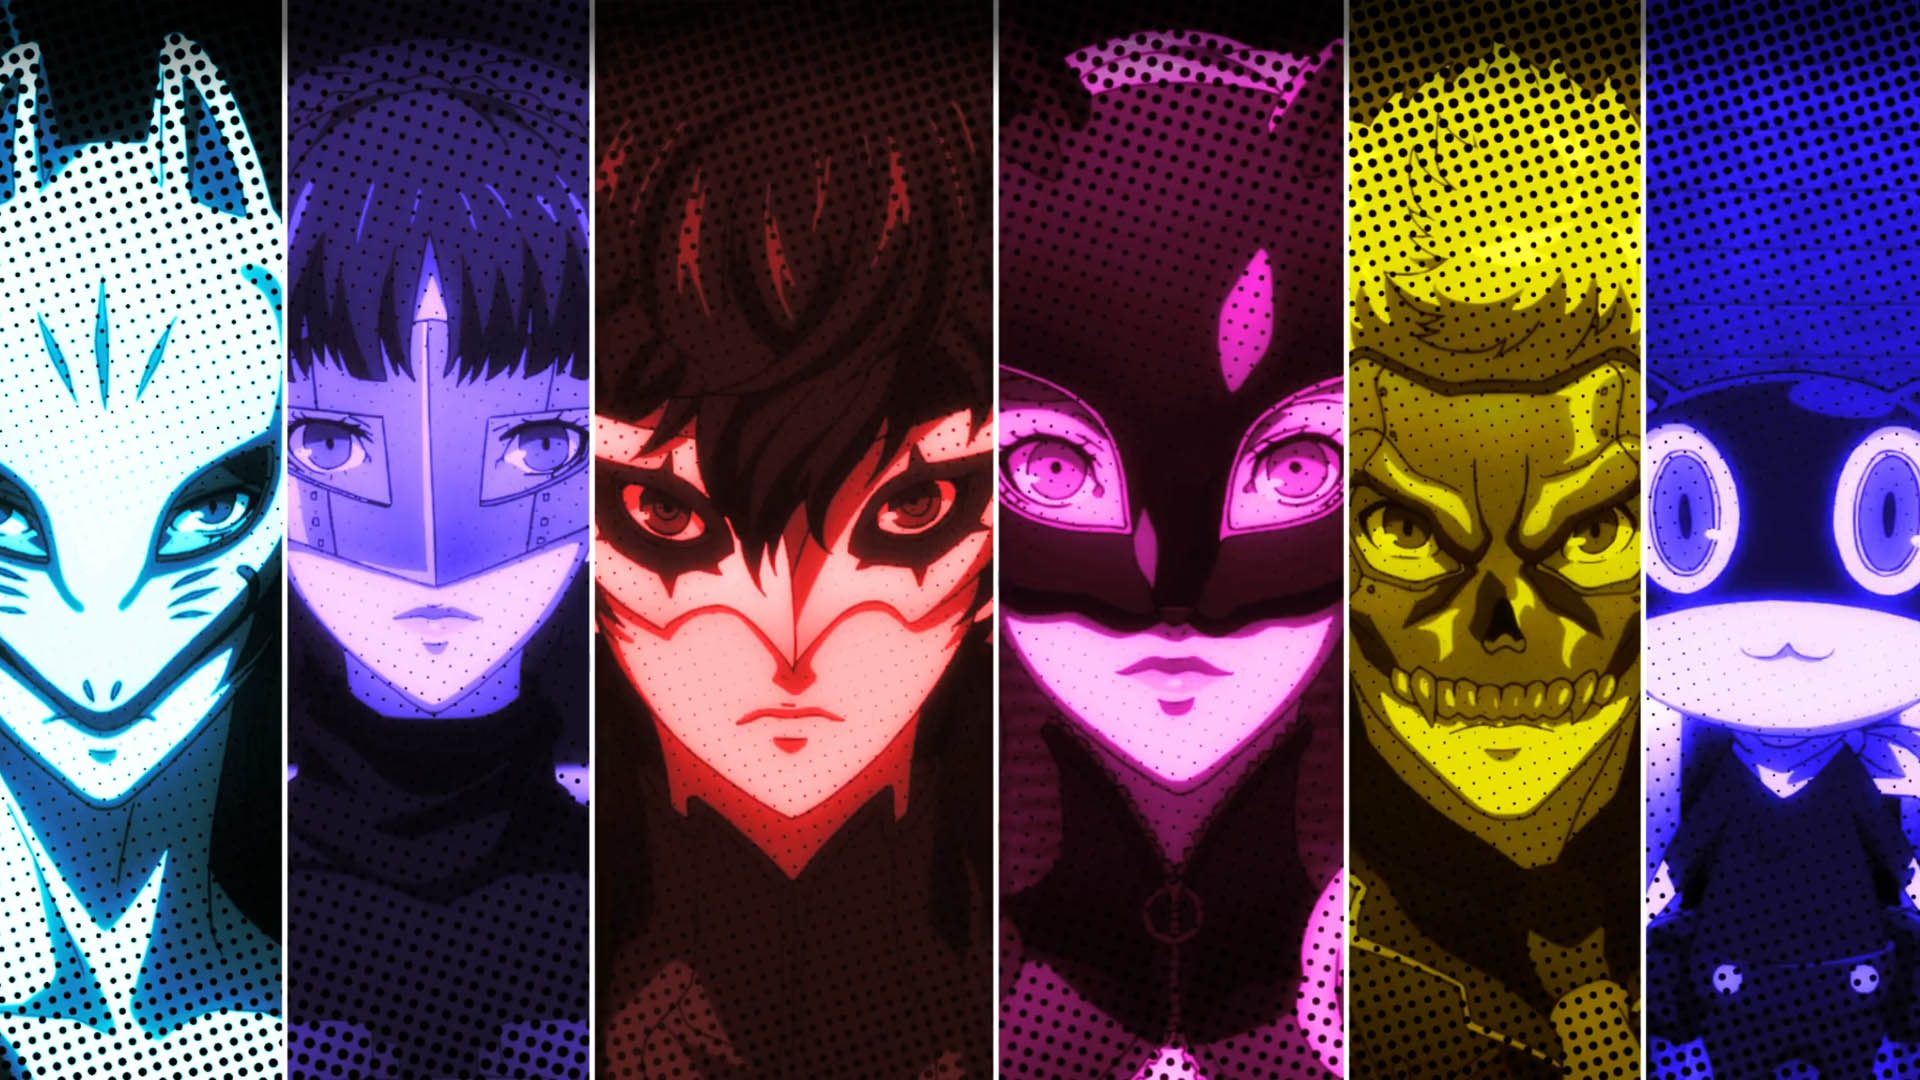 Persona 5 | Opening Intro movie [ENG] - YouTube